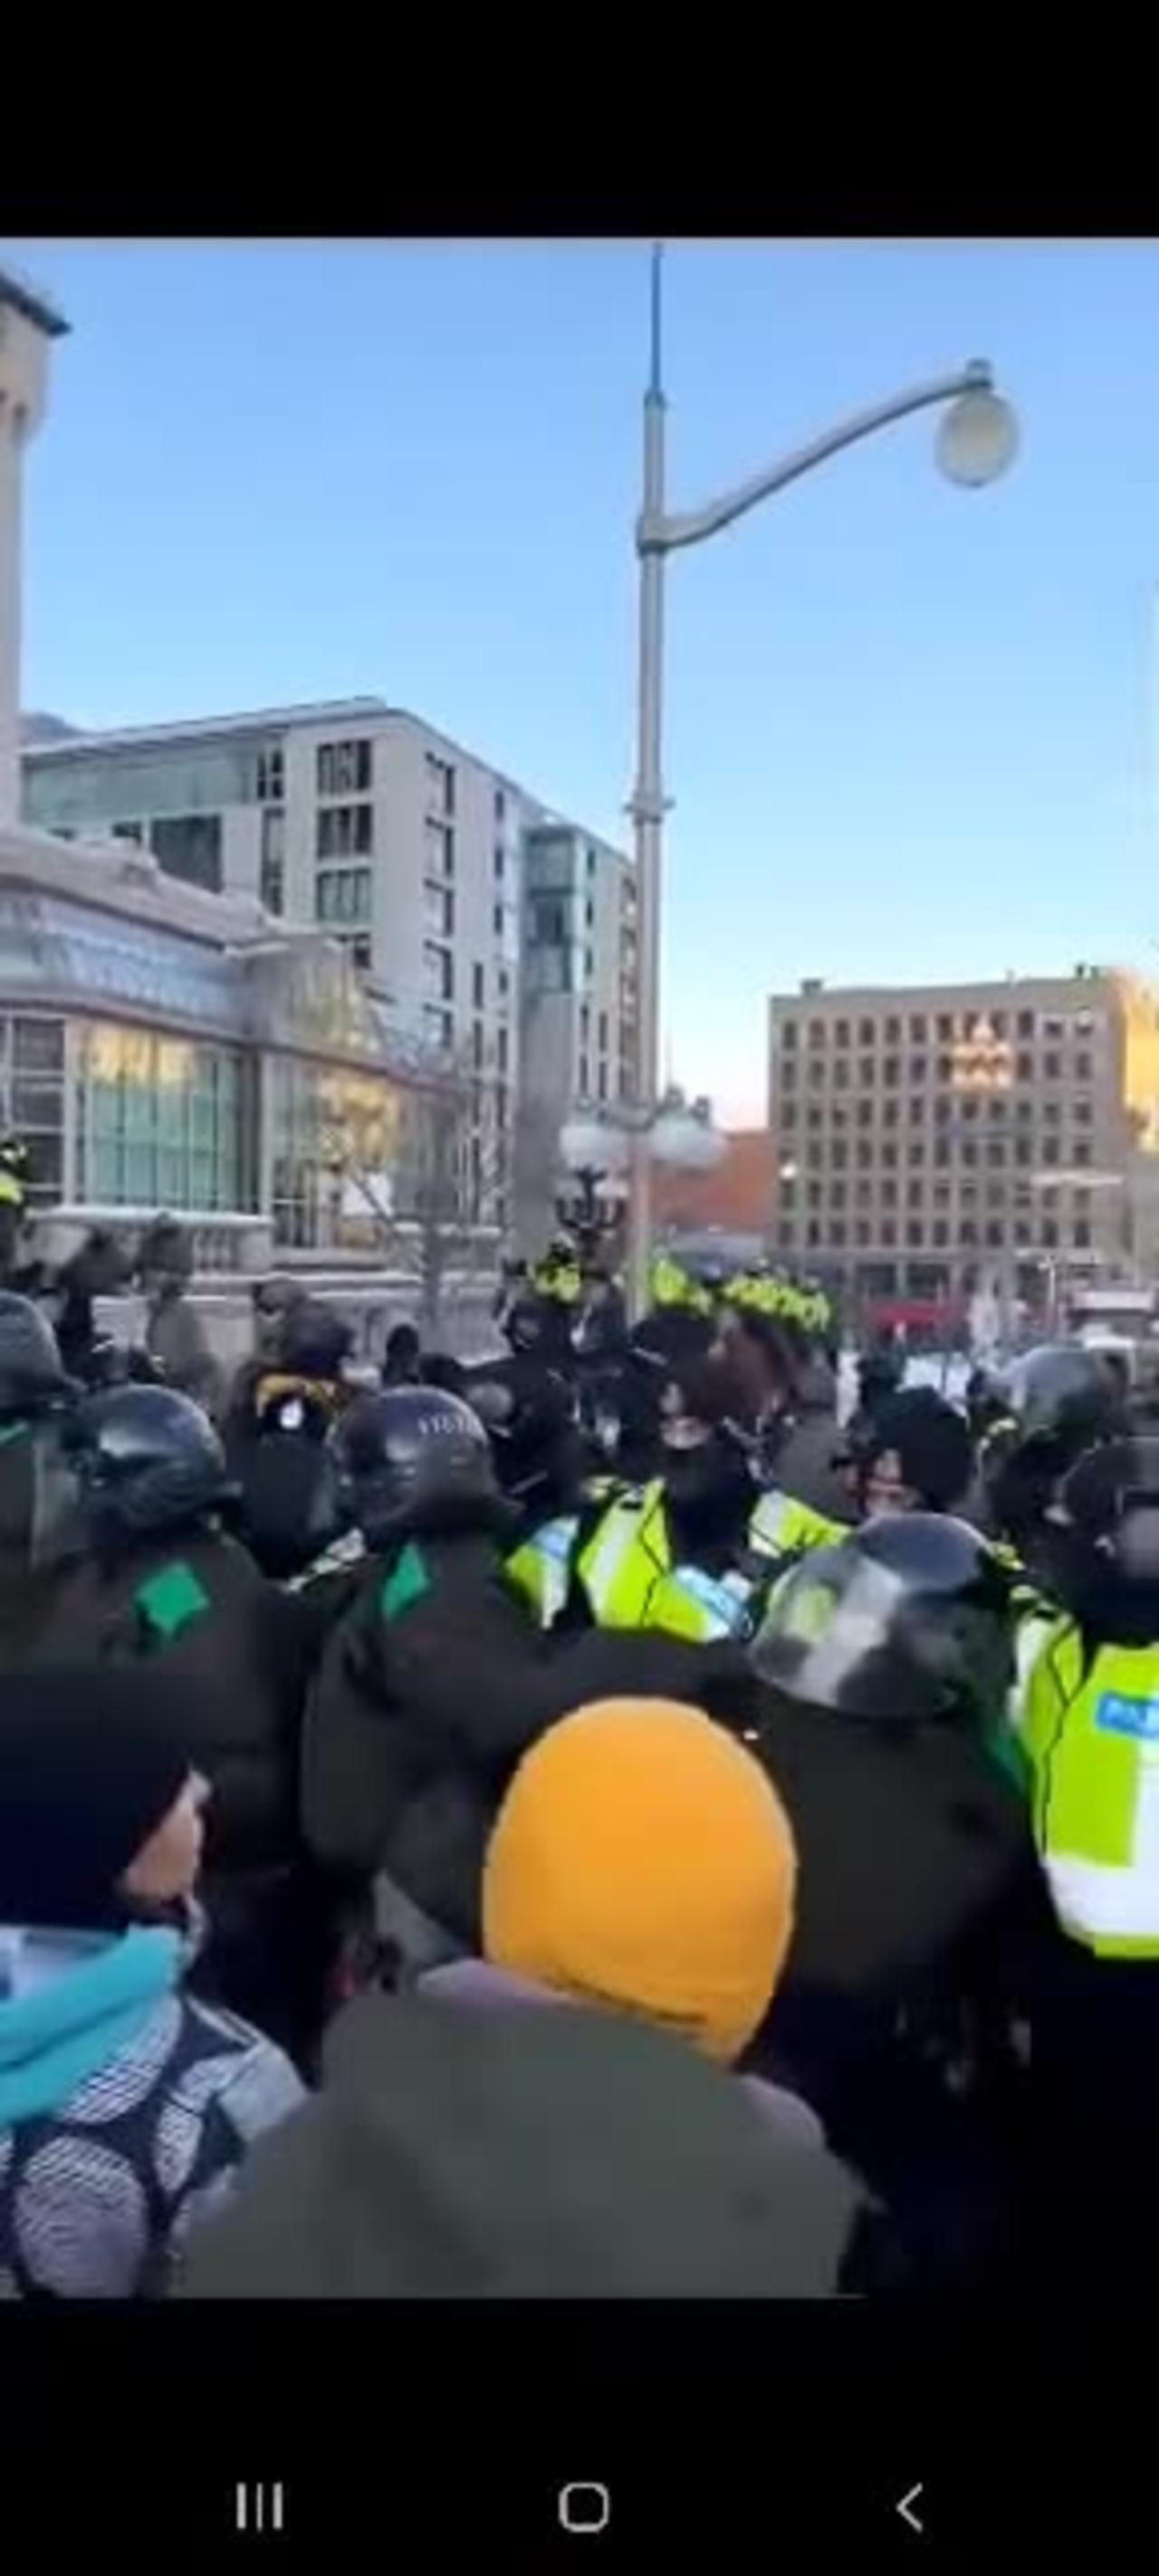 Canadian Protestors CLASH with Mounted Police R.C.M.P.